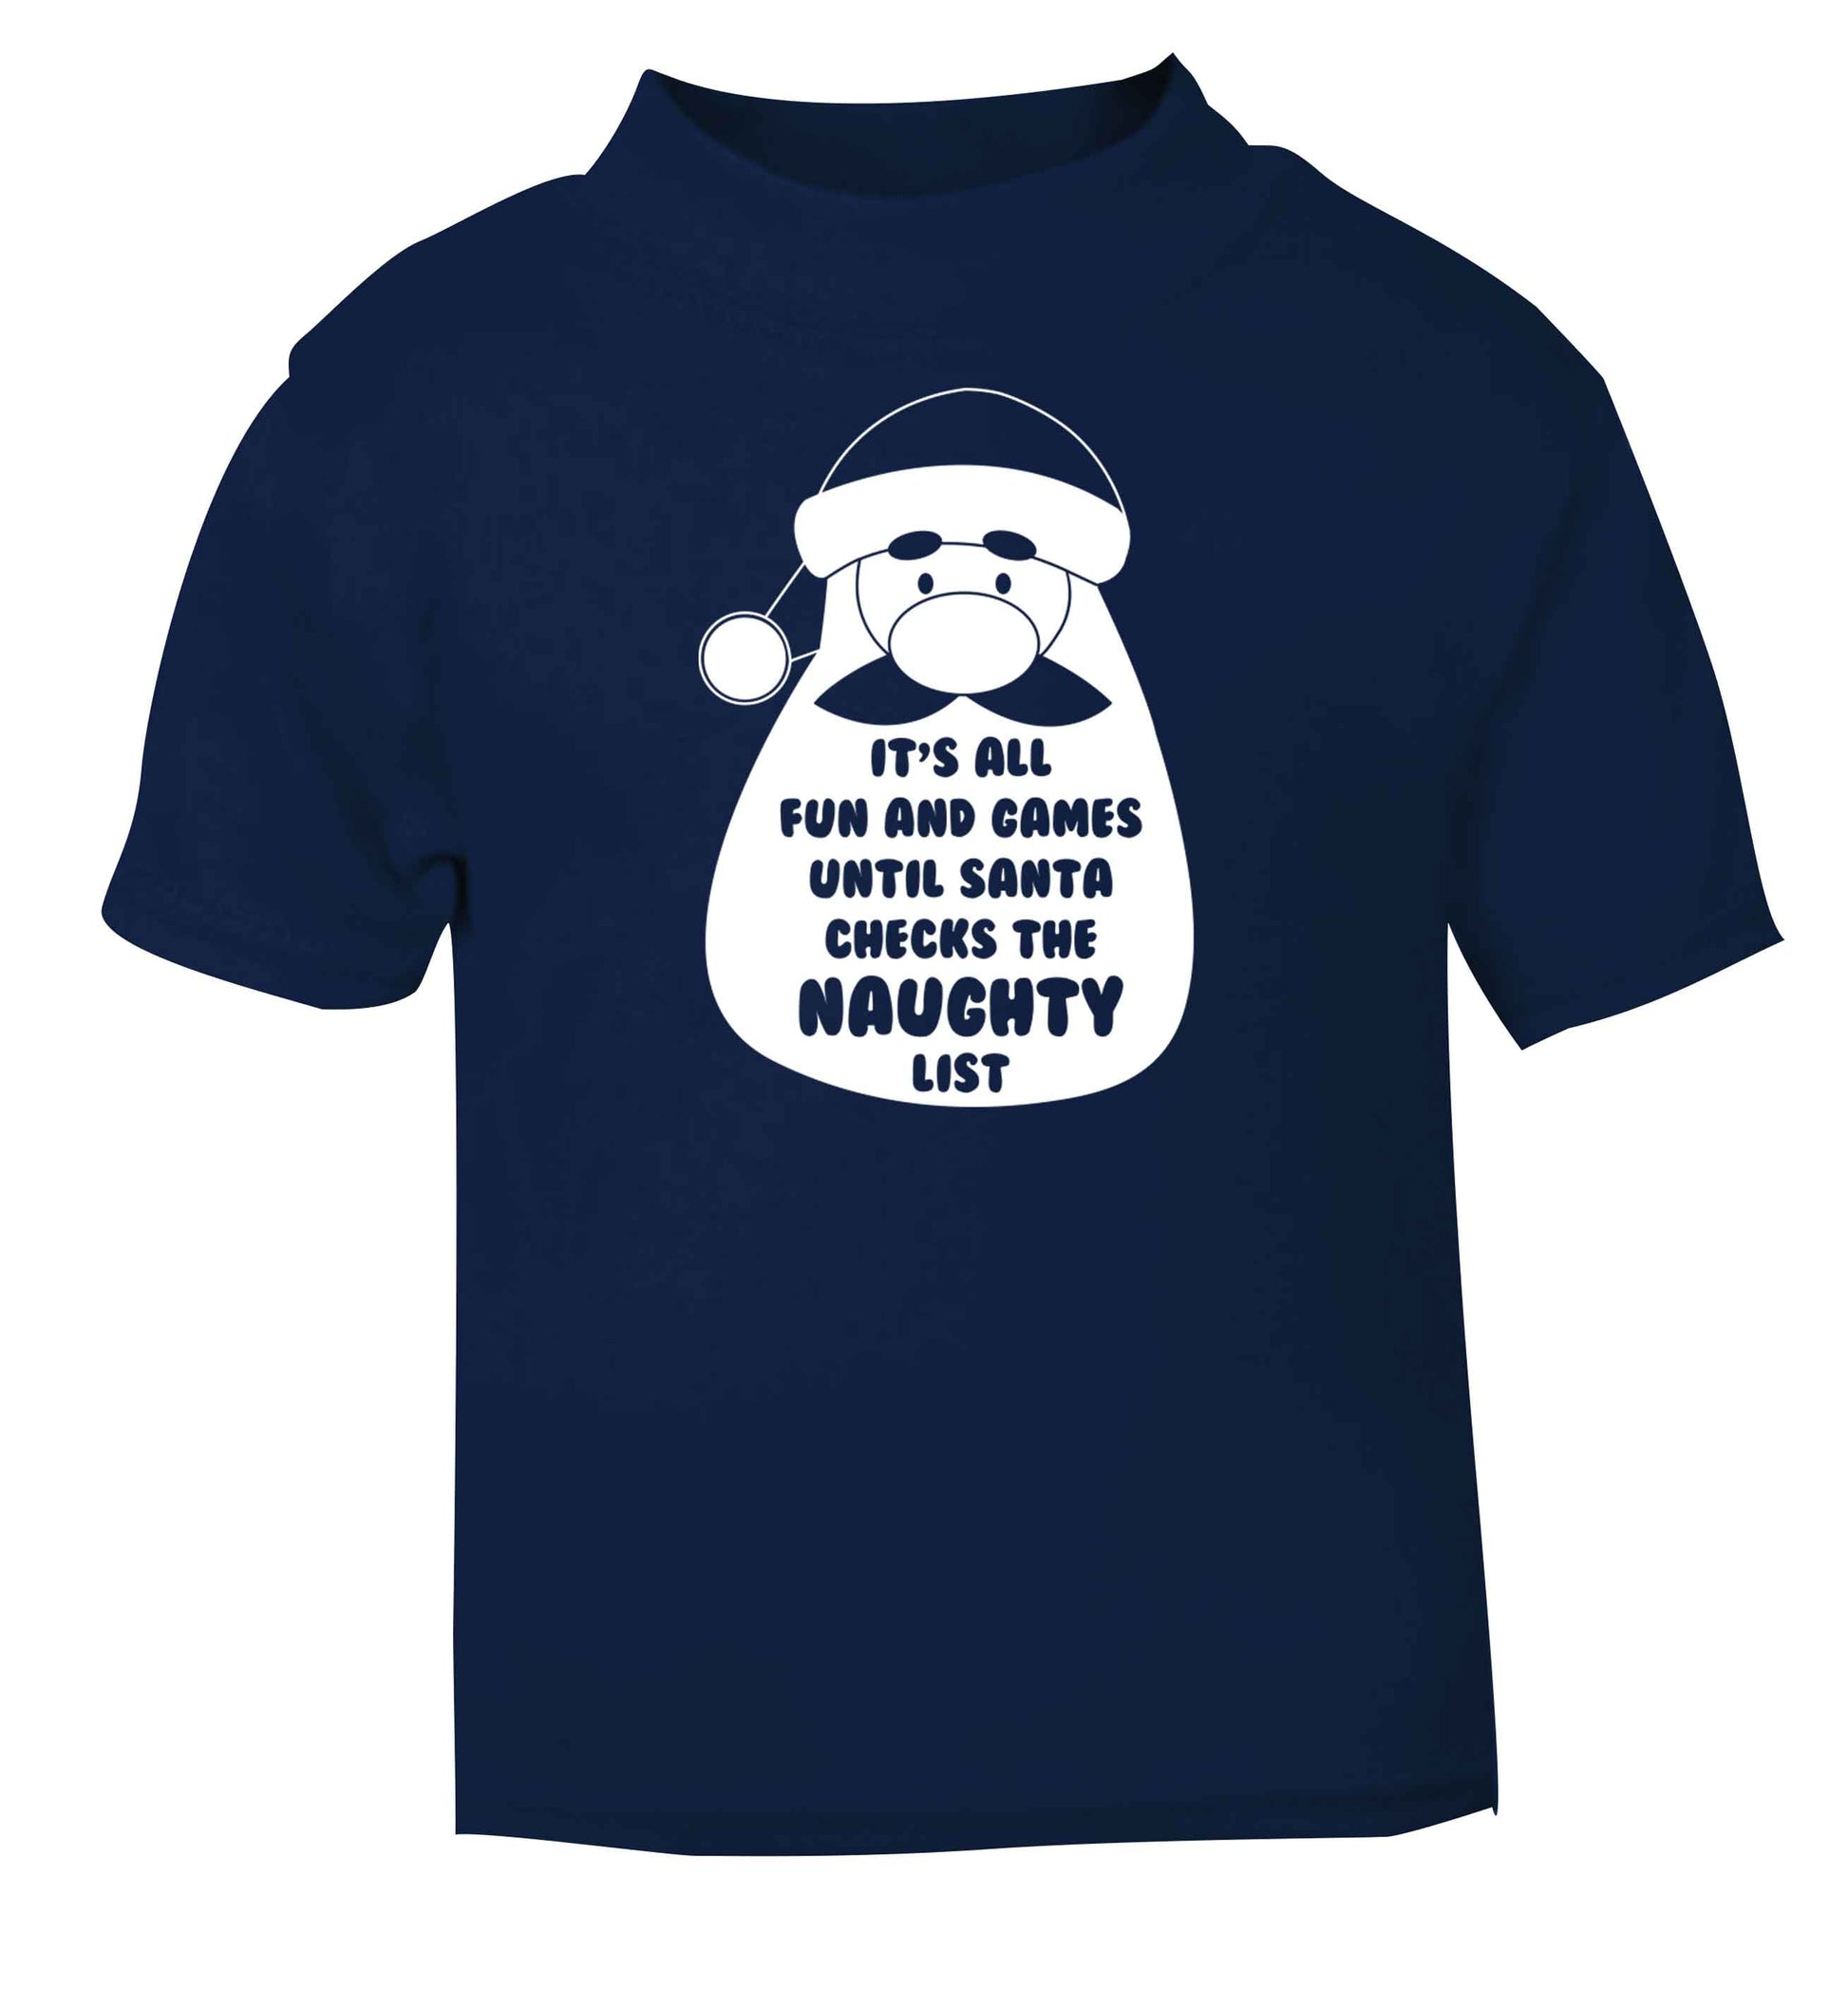 It's all fun and games until Santa checks the naughty list navy baby toddler Tshirt 2 Years